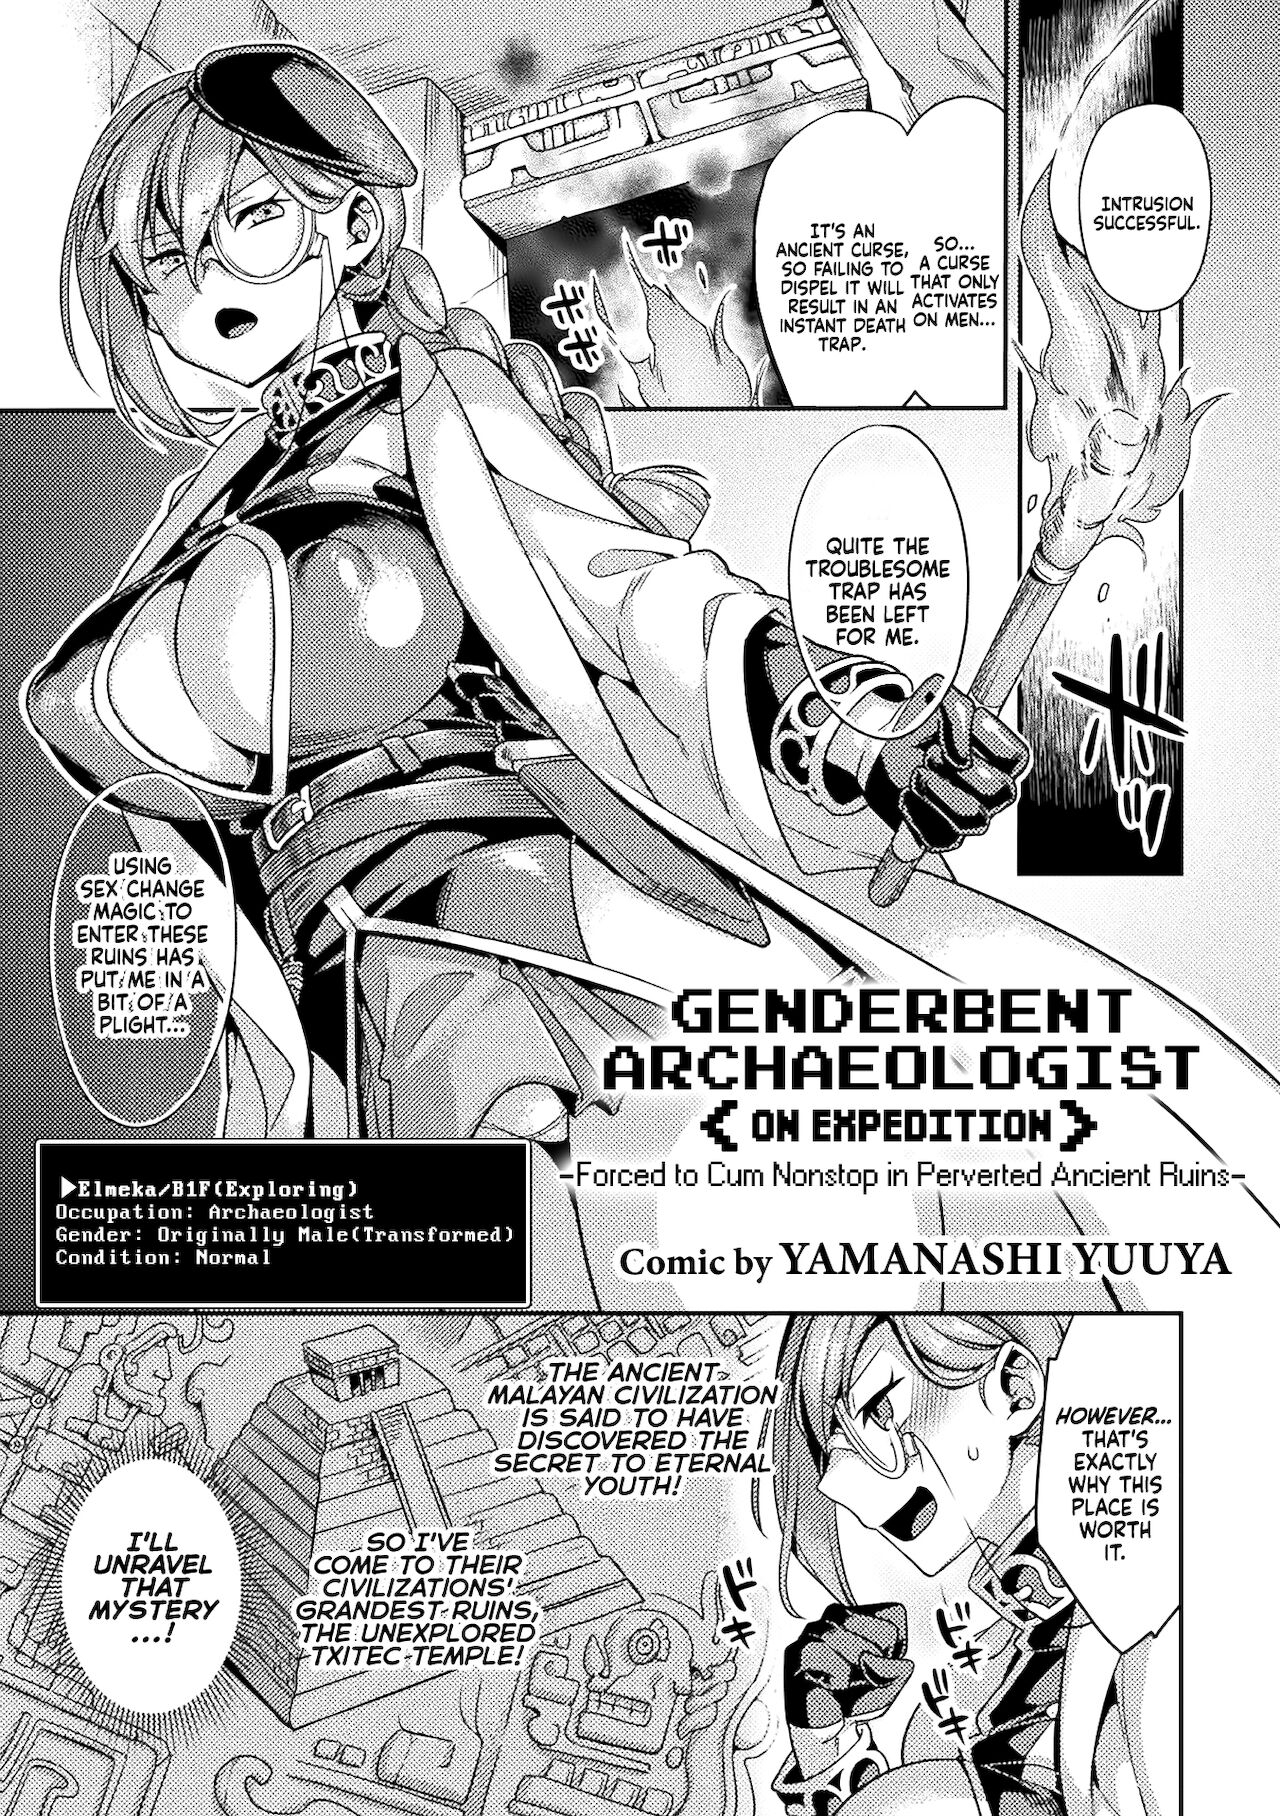 [Yamanashi Yuuya] Genderbent Archaeologist <on expedition> -Forced to Cum Nonstop in Perverted Ancient Ruins- (2D Comic Magazine Mesu Ochi! TS Ero Trap Dungeon Vol. 1) [English] [WhiteSymphony] [Digital] 0